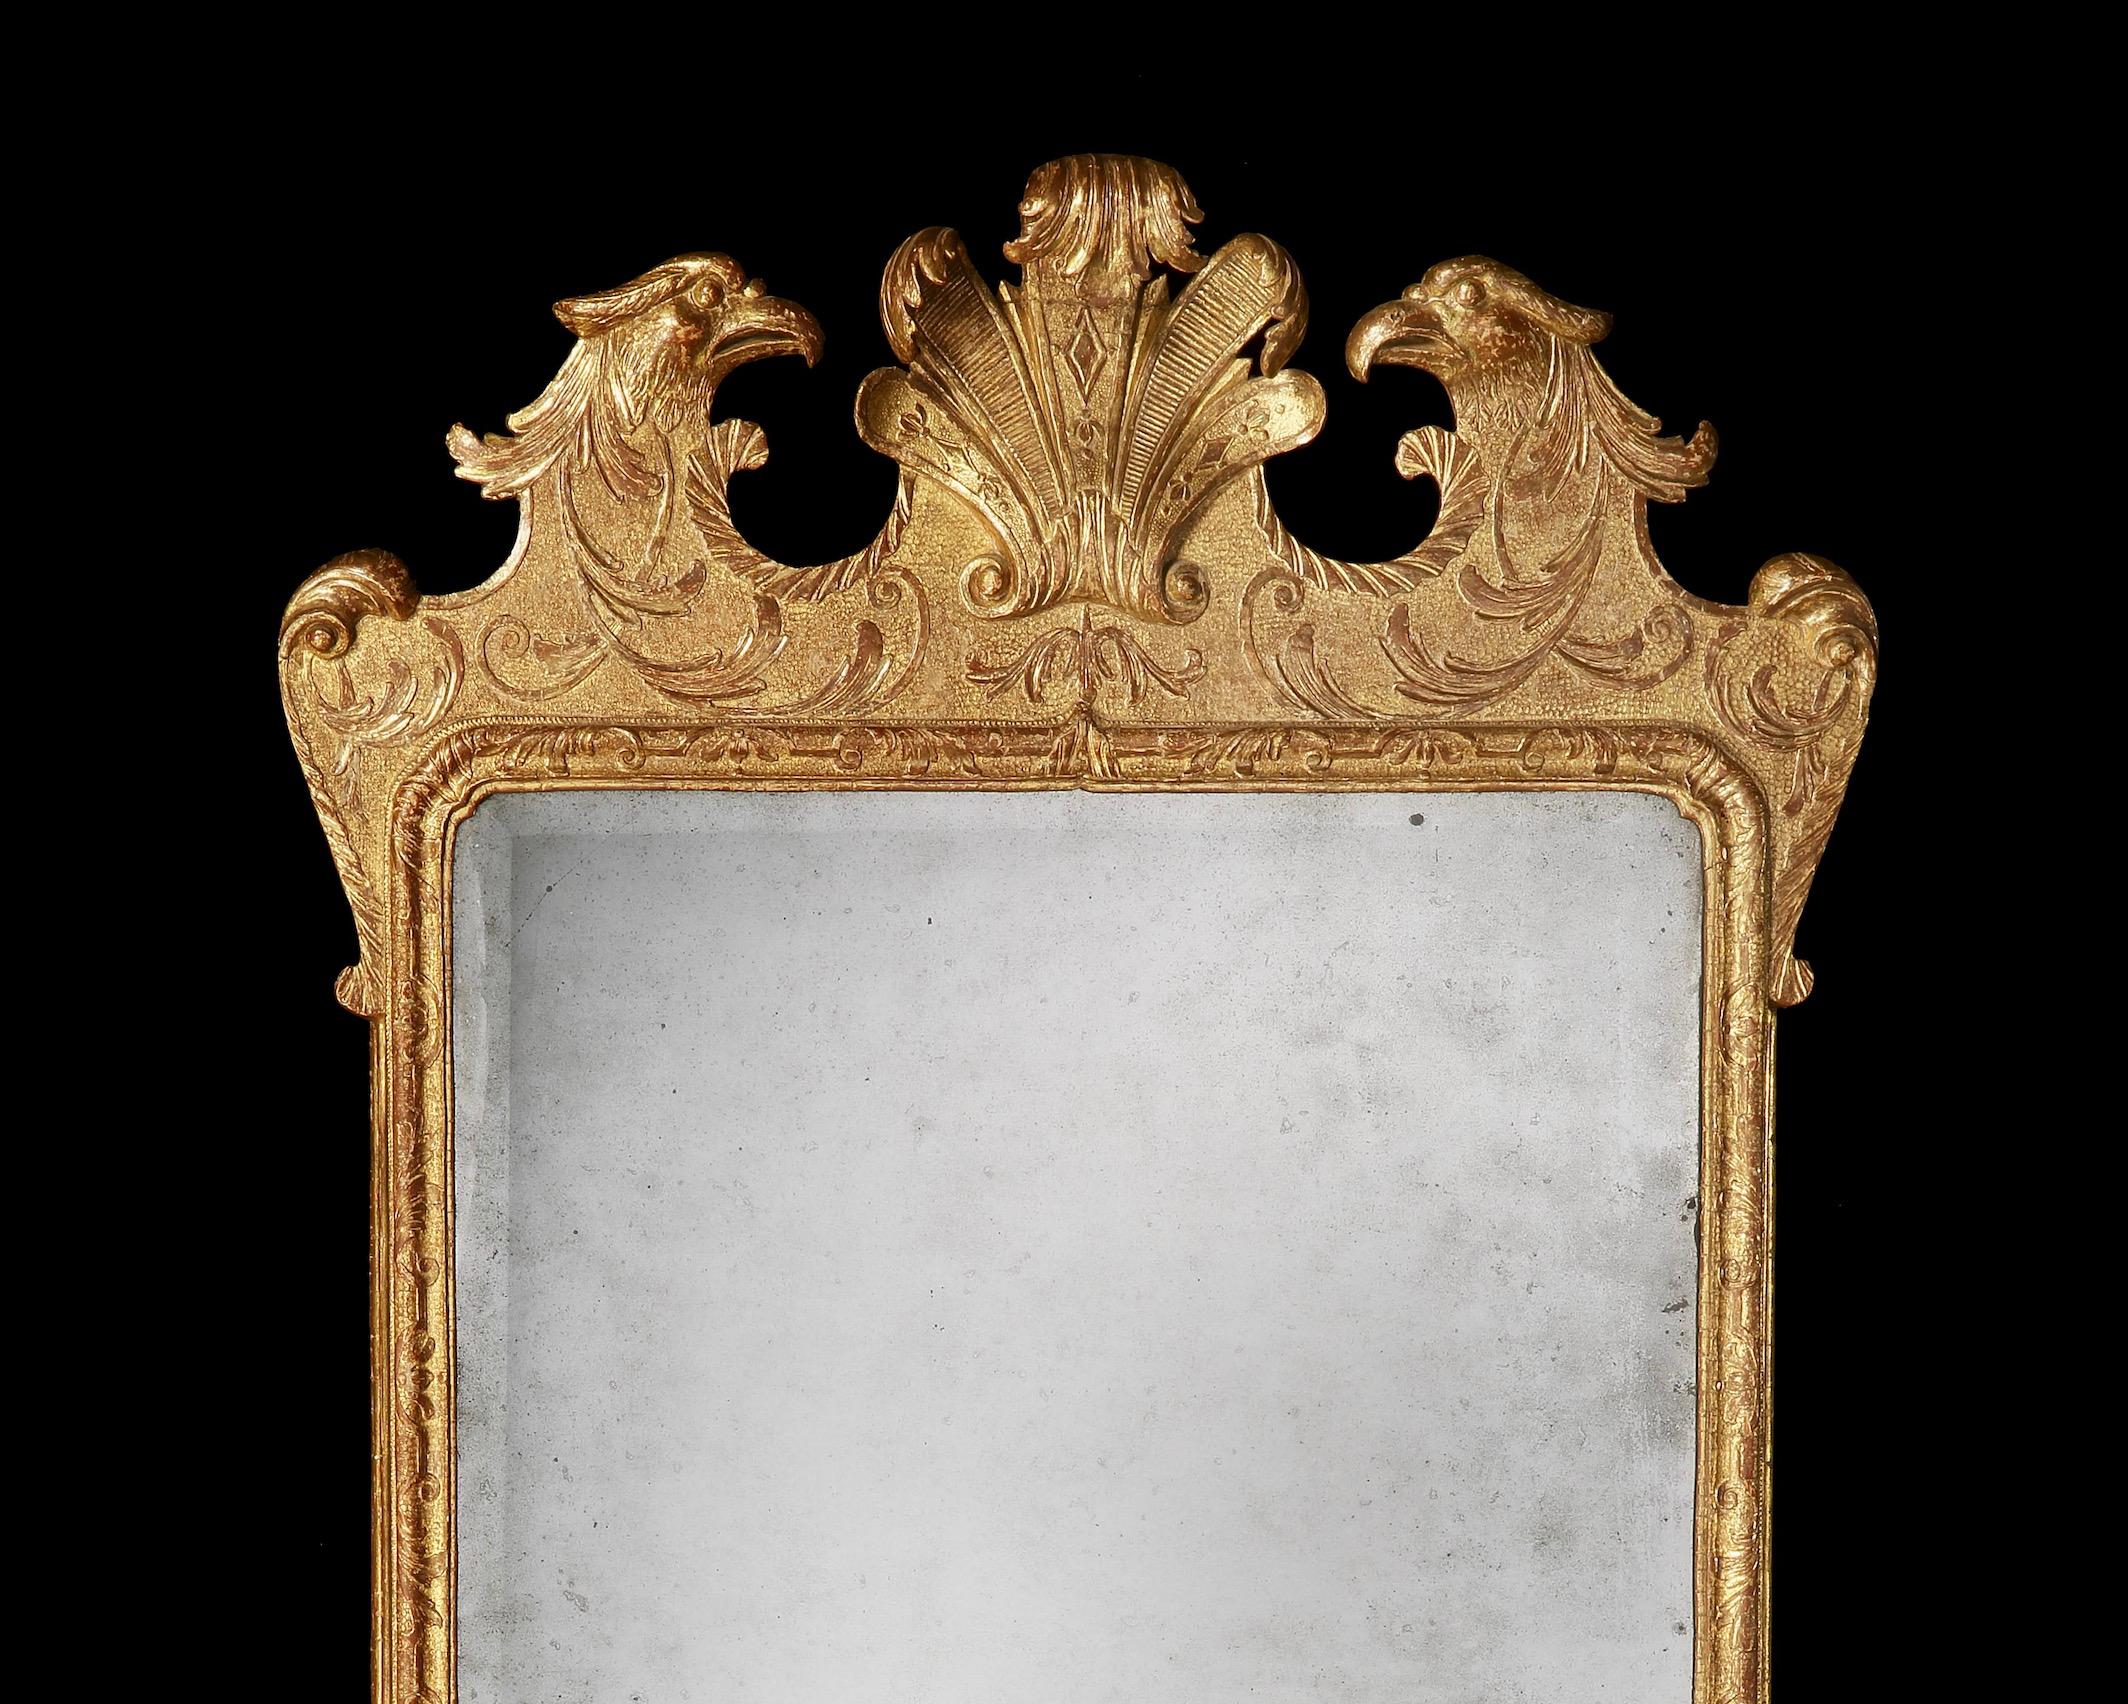 English 18th Century George II Giltwood Mirror with Eagles Attributed to John Belchier